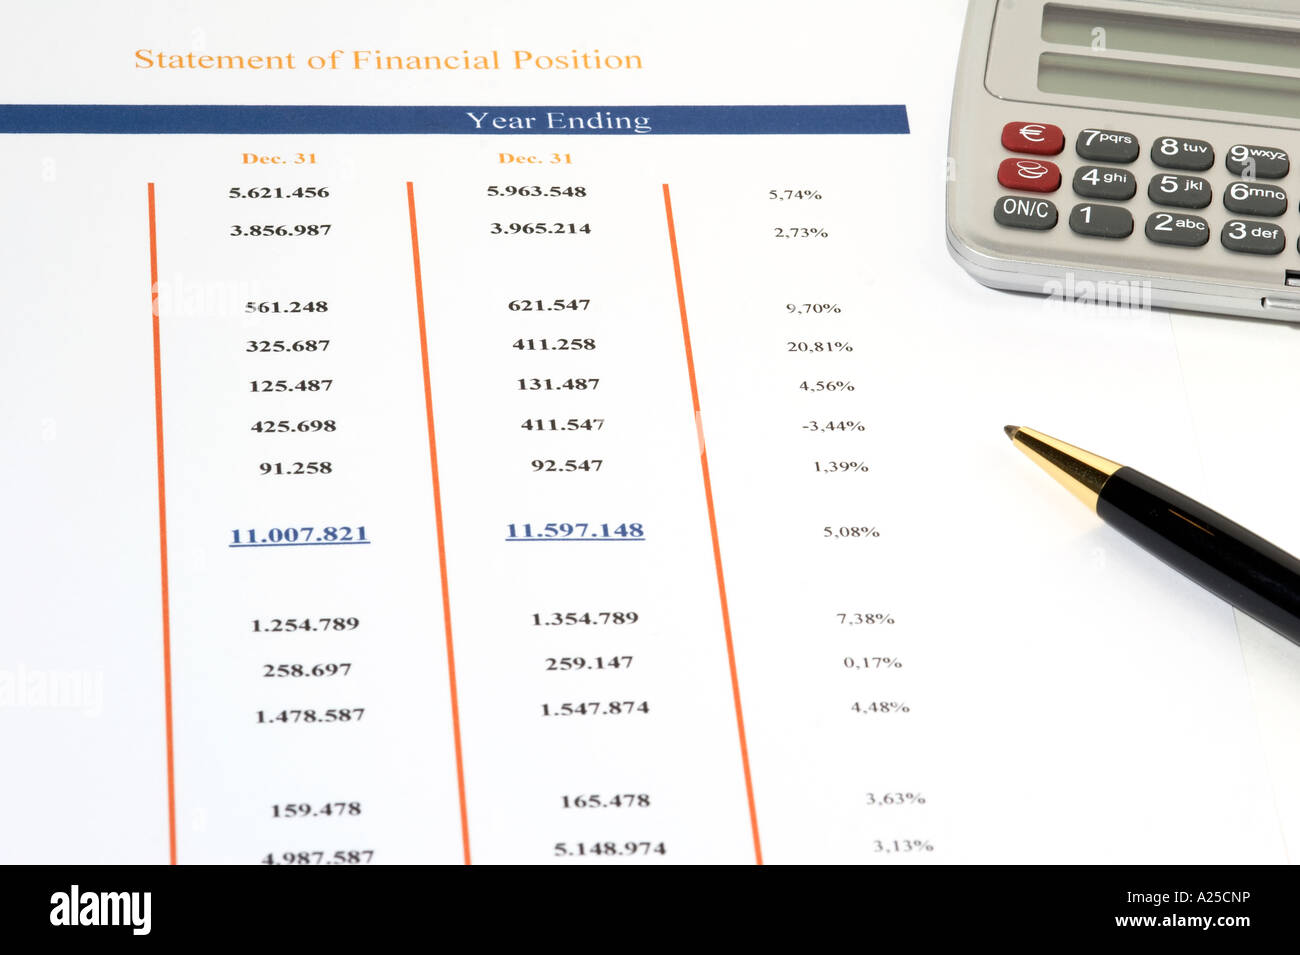 Statement of Financial Position with ball pen and calculator Stock Photo